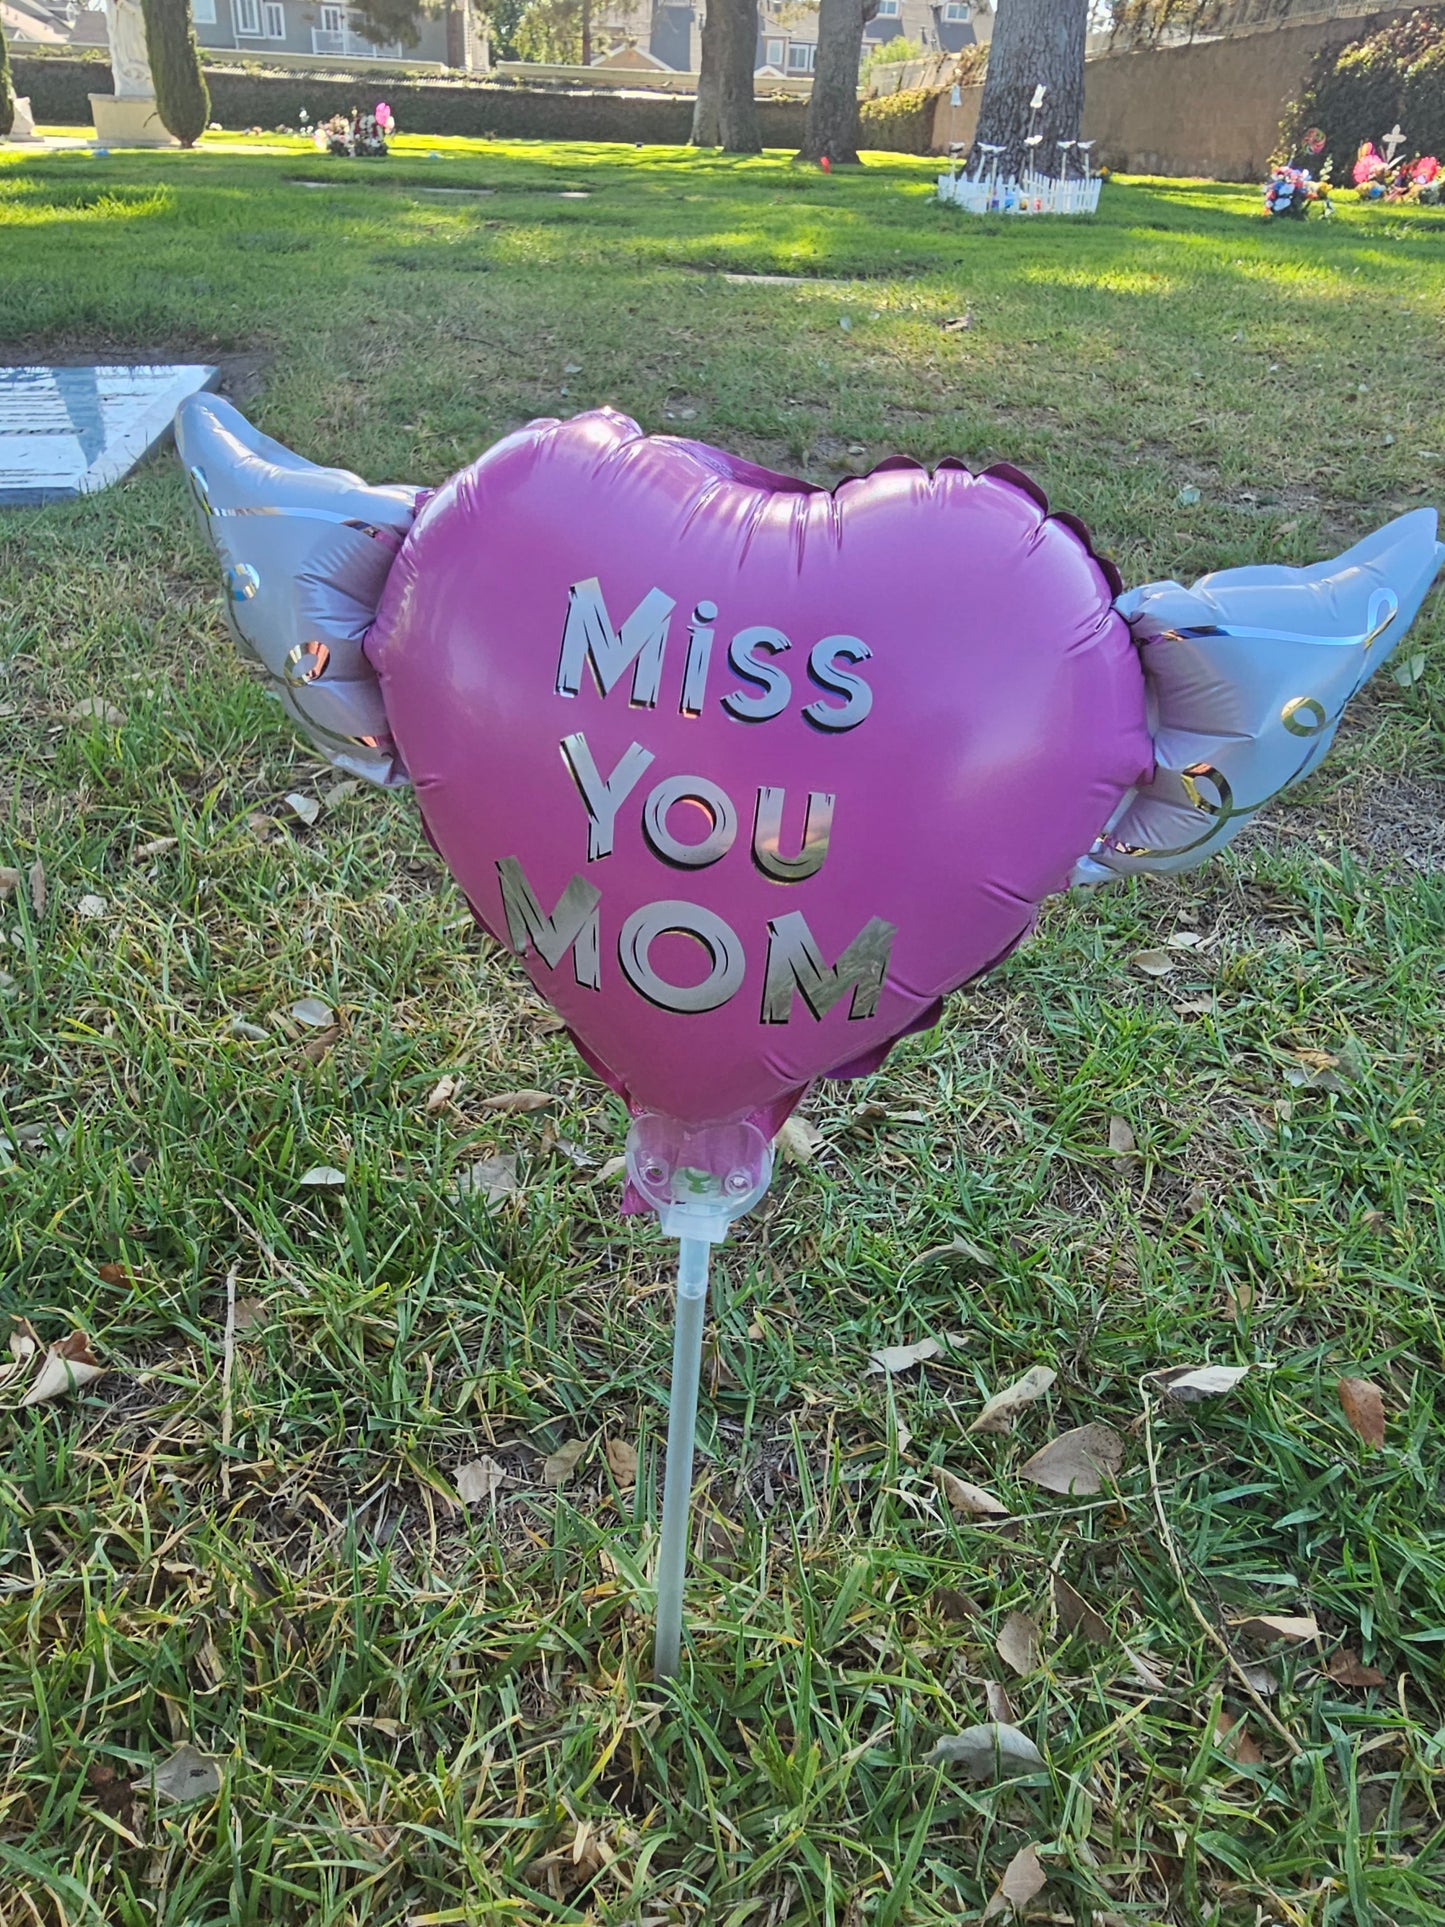 Heavenly Balloons ® on a Stick Miss You Mom (pink) balloon heart-shaped with angel wings